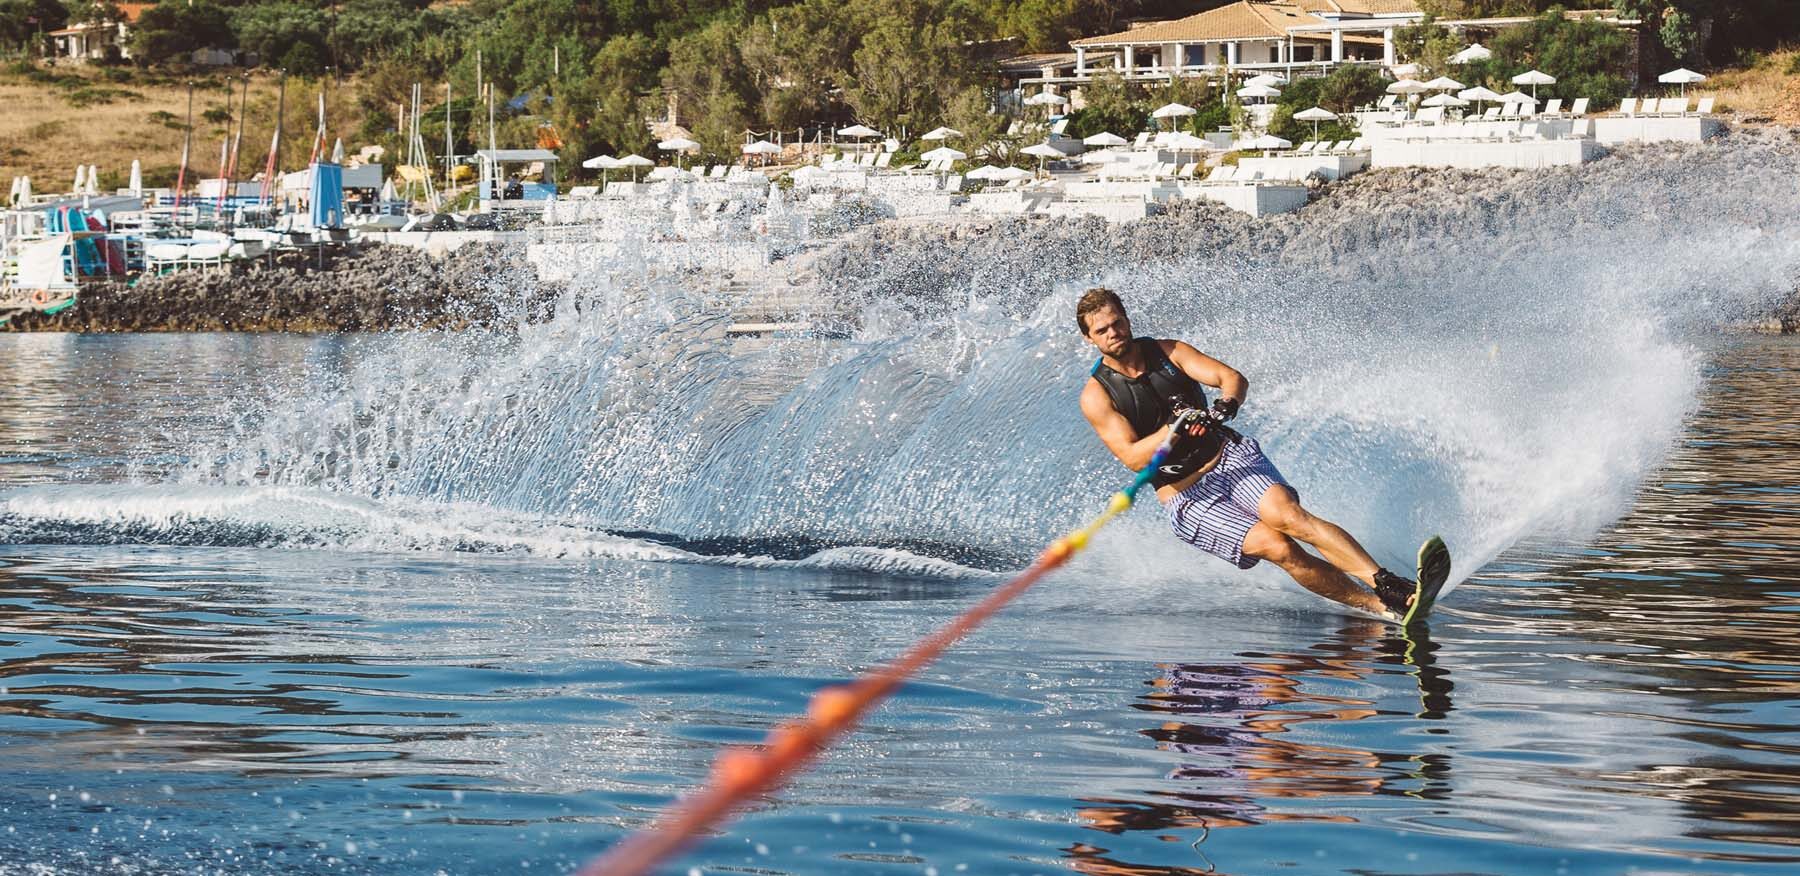 Impressive spray from water skiing